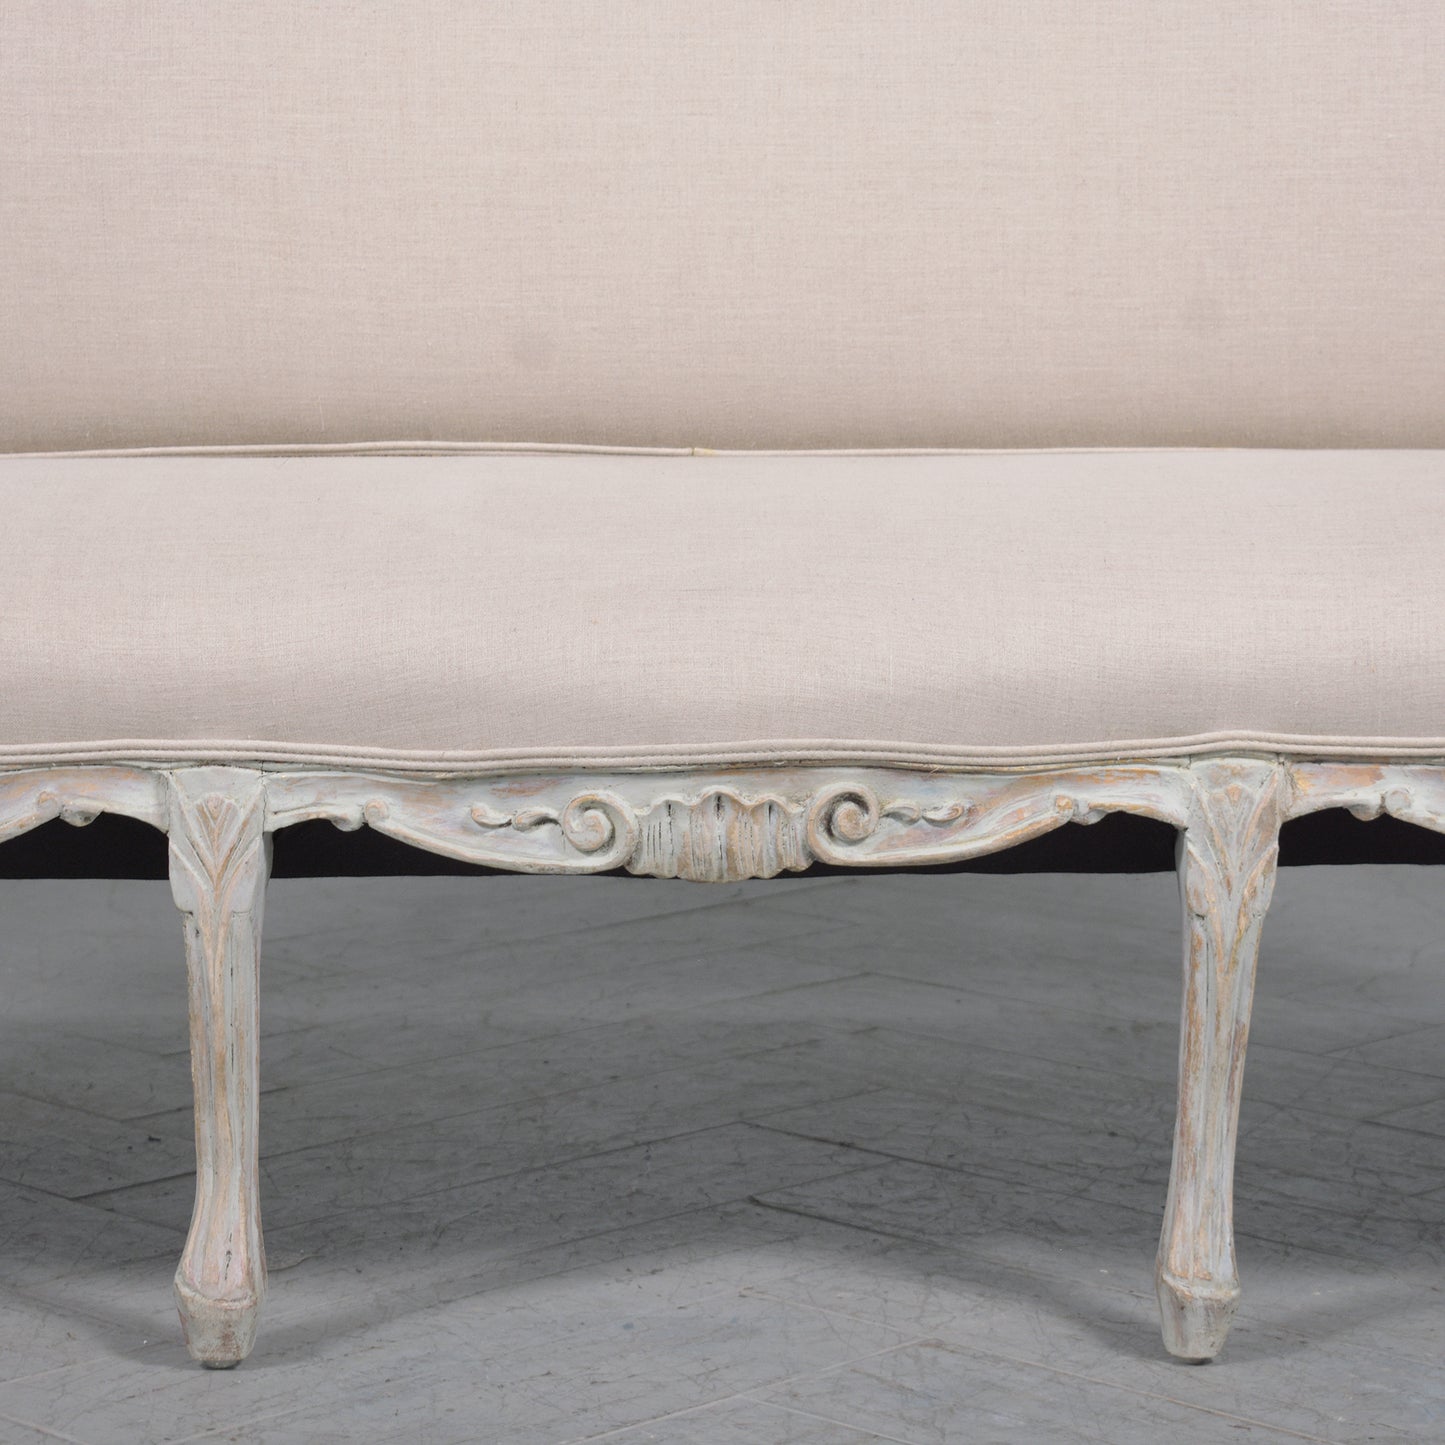 Exquisite Early 1900s French Hand-Carved Wooden Sofa